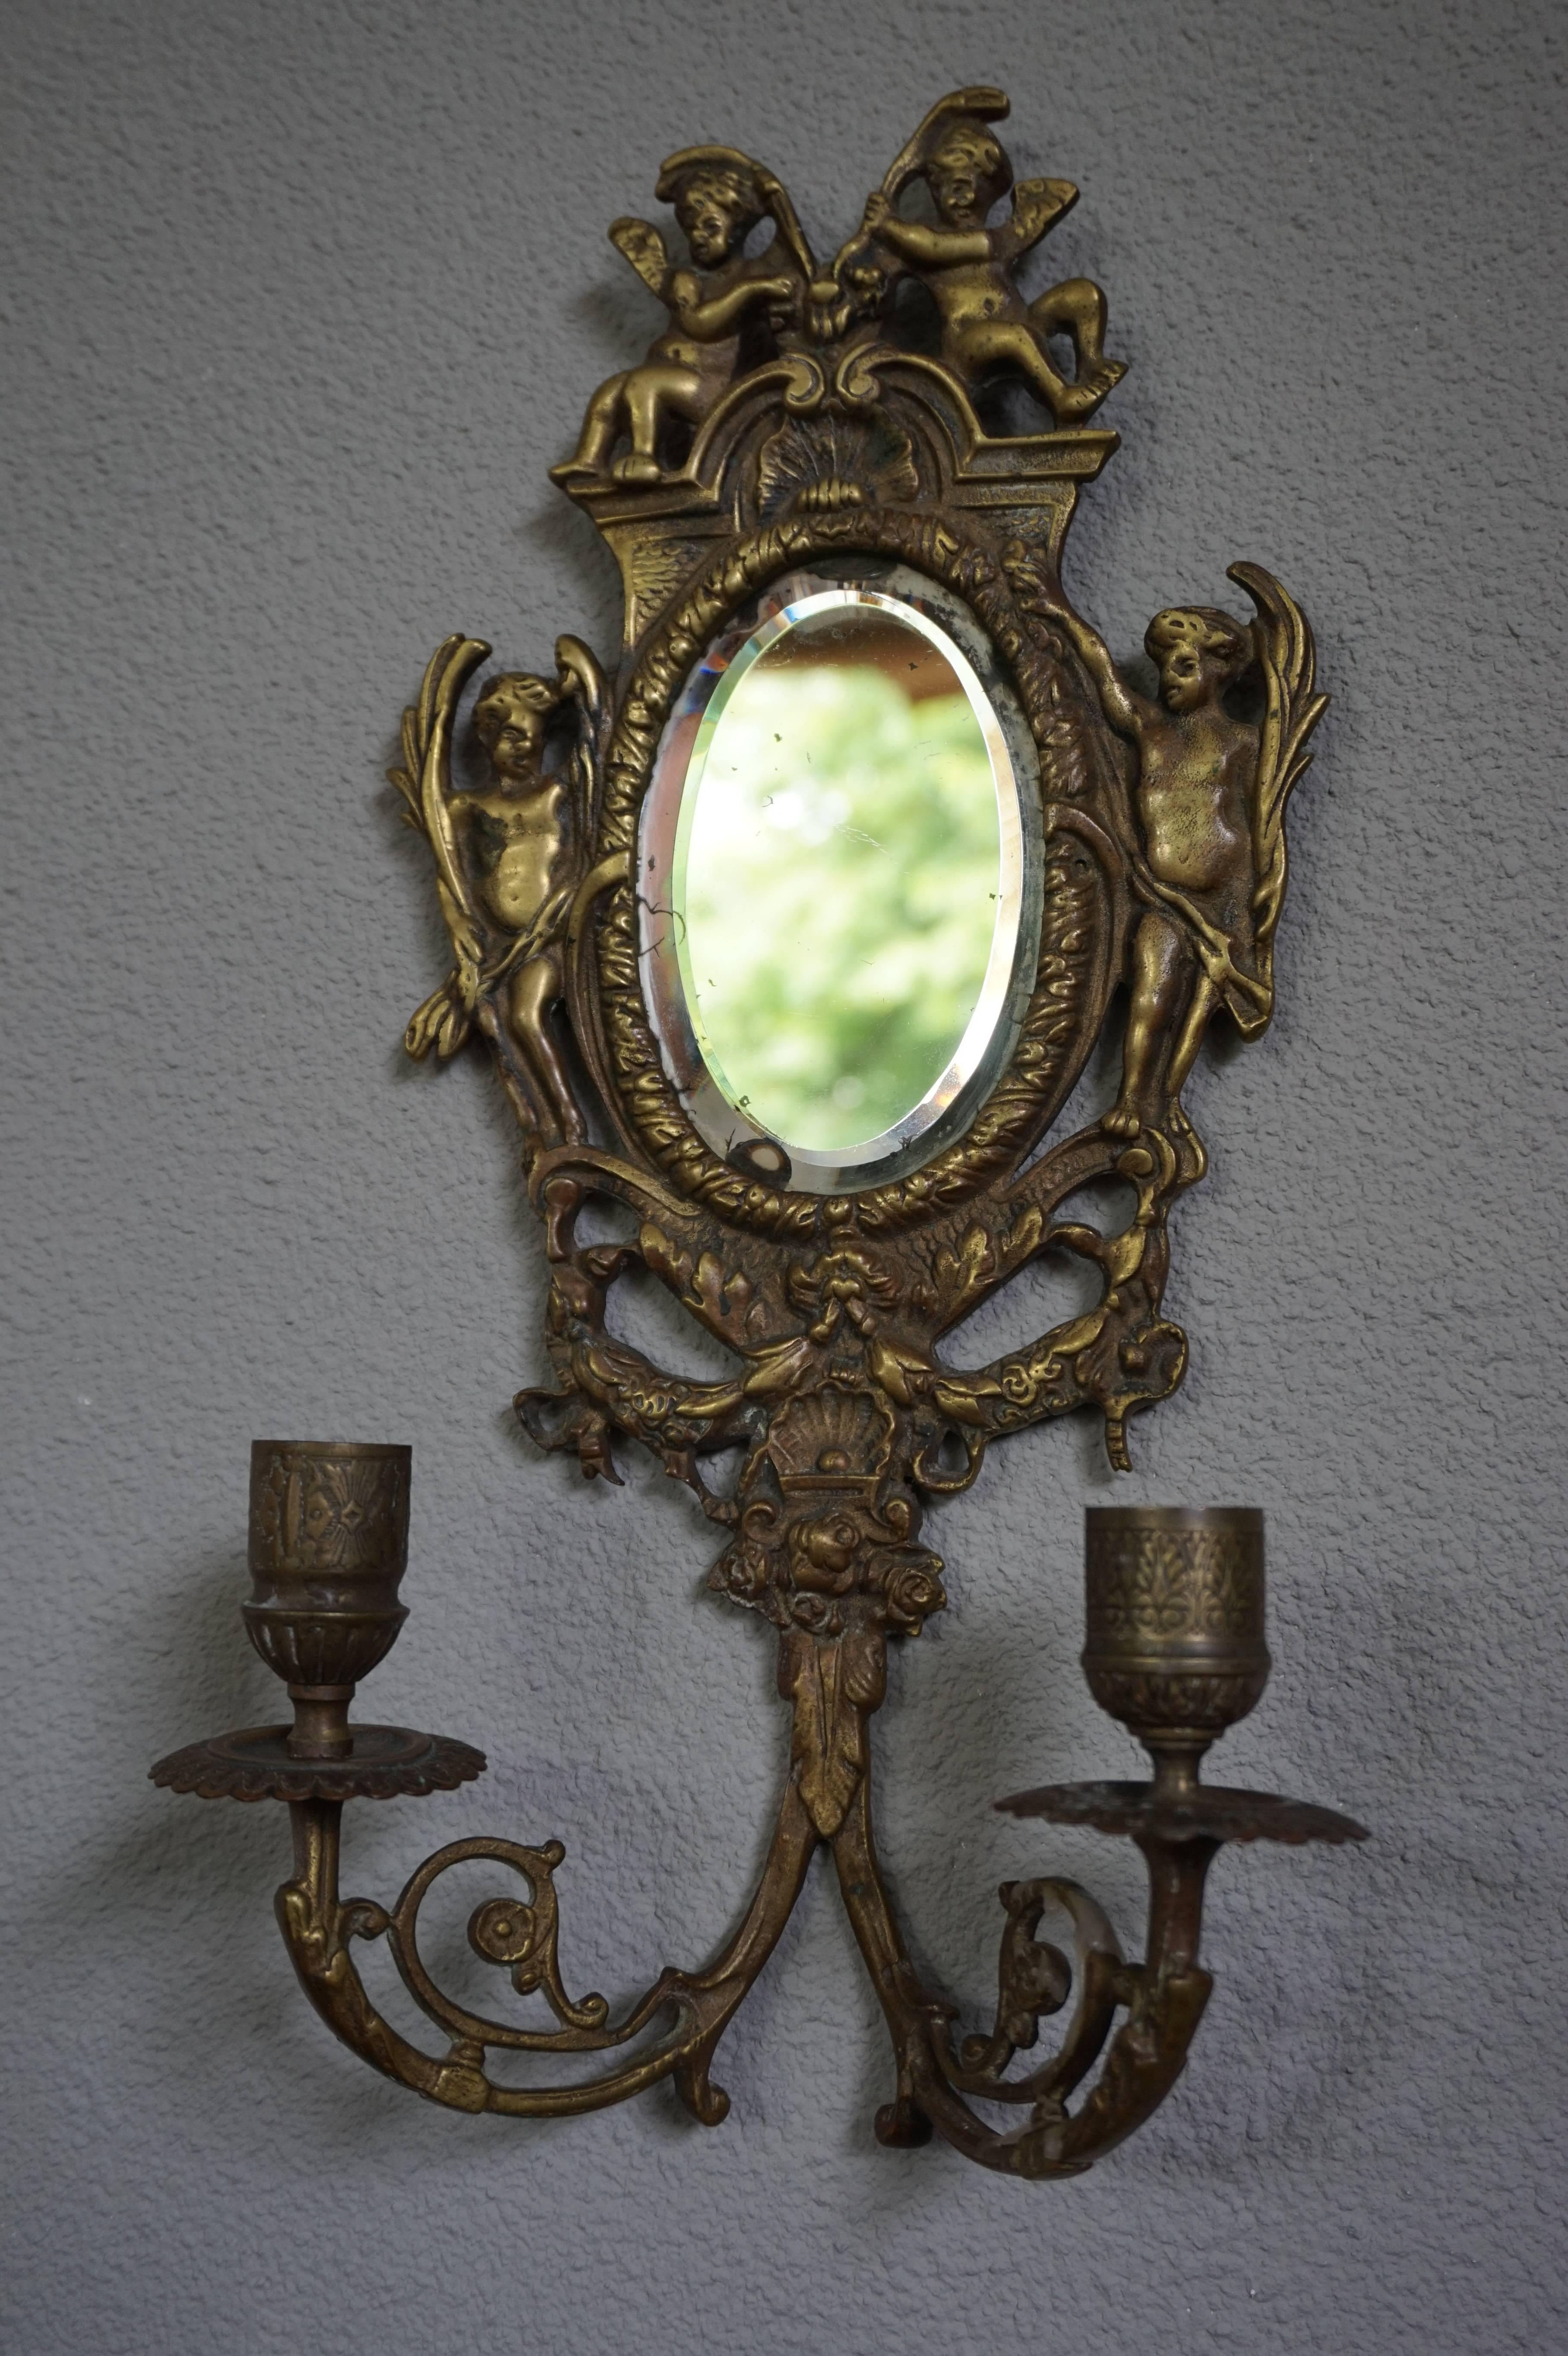 Practical size pair of Renaissance Revival sconces with putti and more.

This antique pair of sconces will look great above a side table, your bedside cabinets or in a hallway. This pair comes with the original, antique, small, beveled, oval